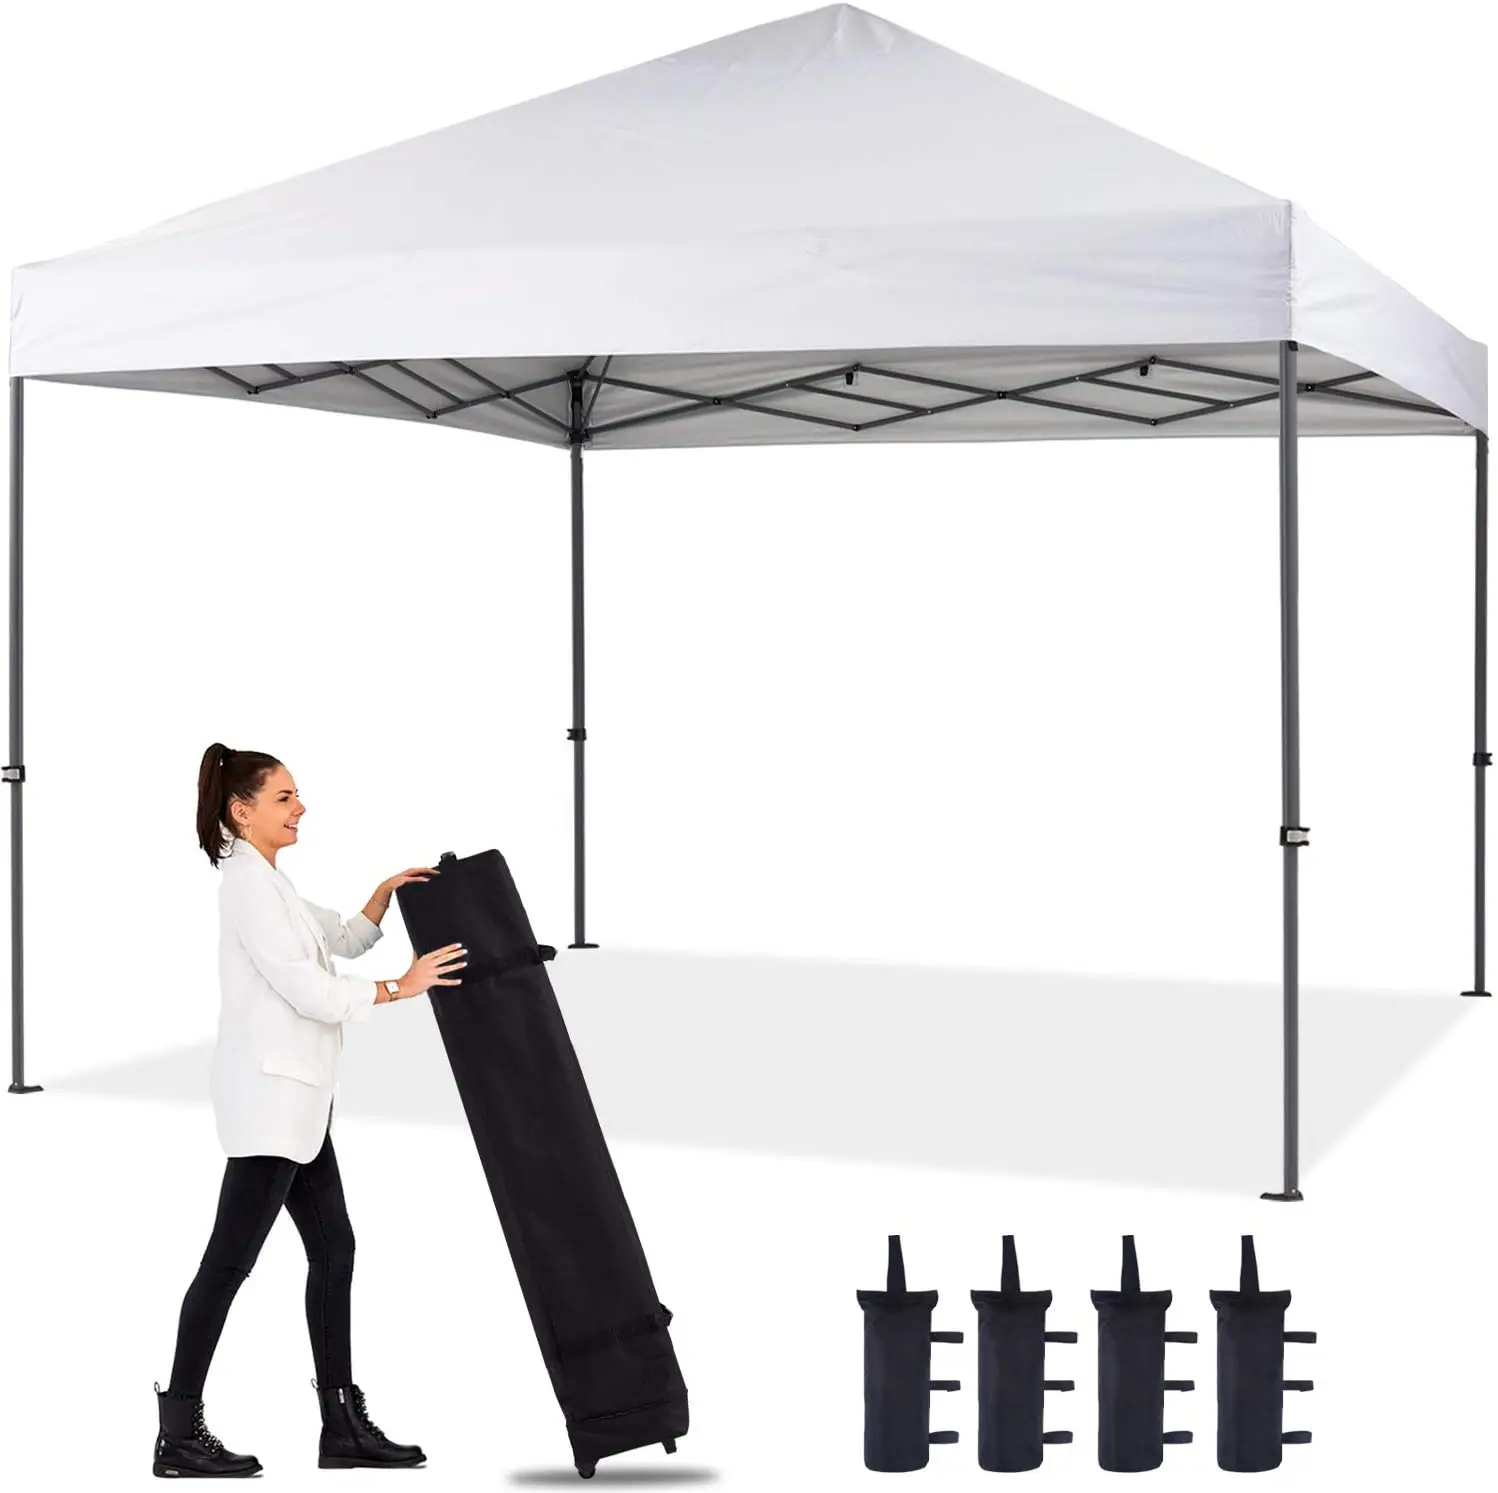 

Clearance For Sale Outdoor Events Party Foldable Canopy Tent Large 10X10/10X20 With Aluminum Frame, Popular color is black, beige, coffee,white or custom color